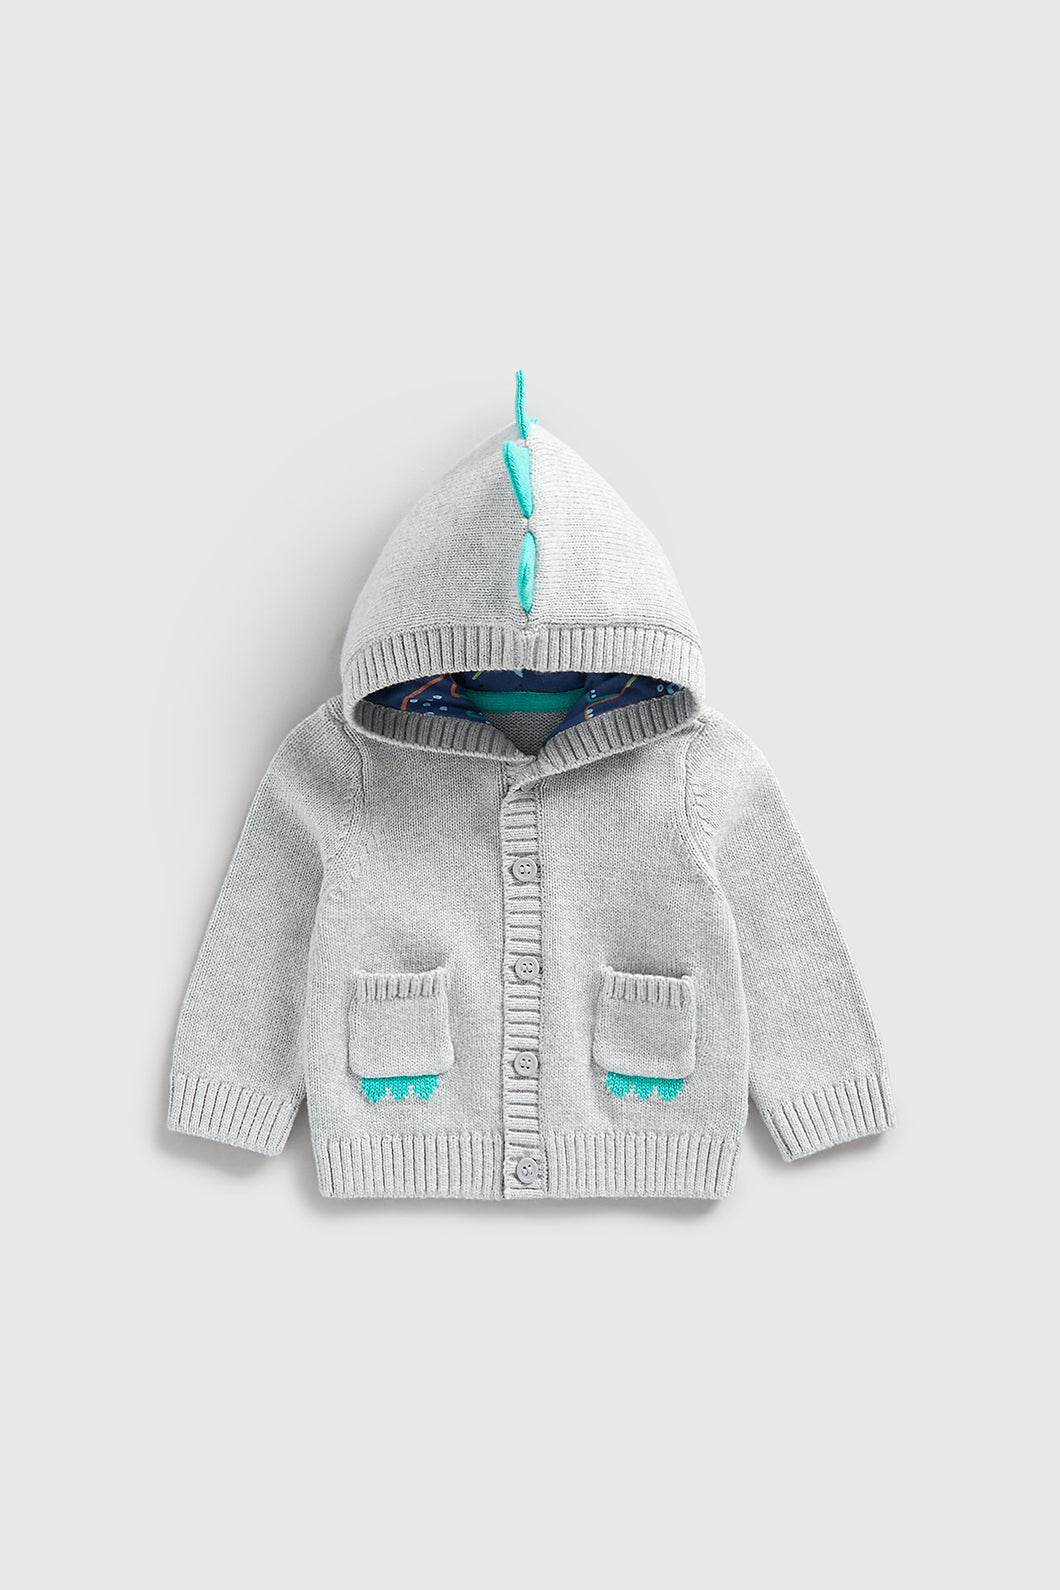 Mothercare Dinosaur Knitted Cardigan